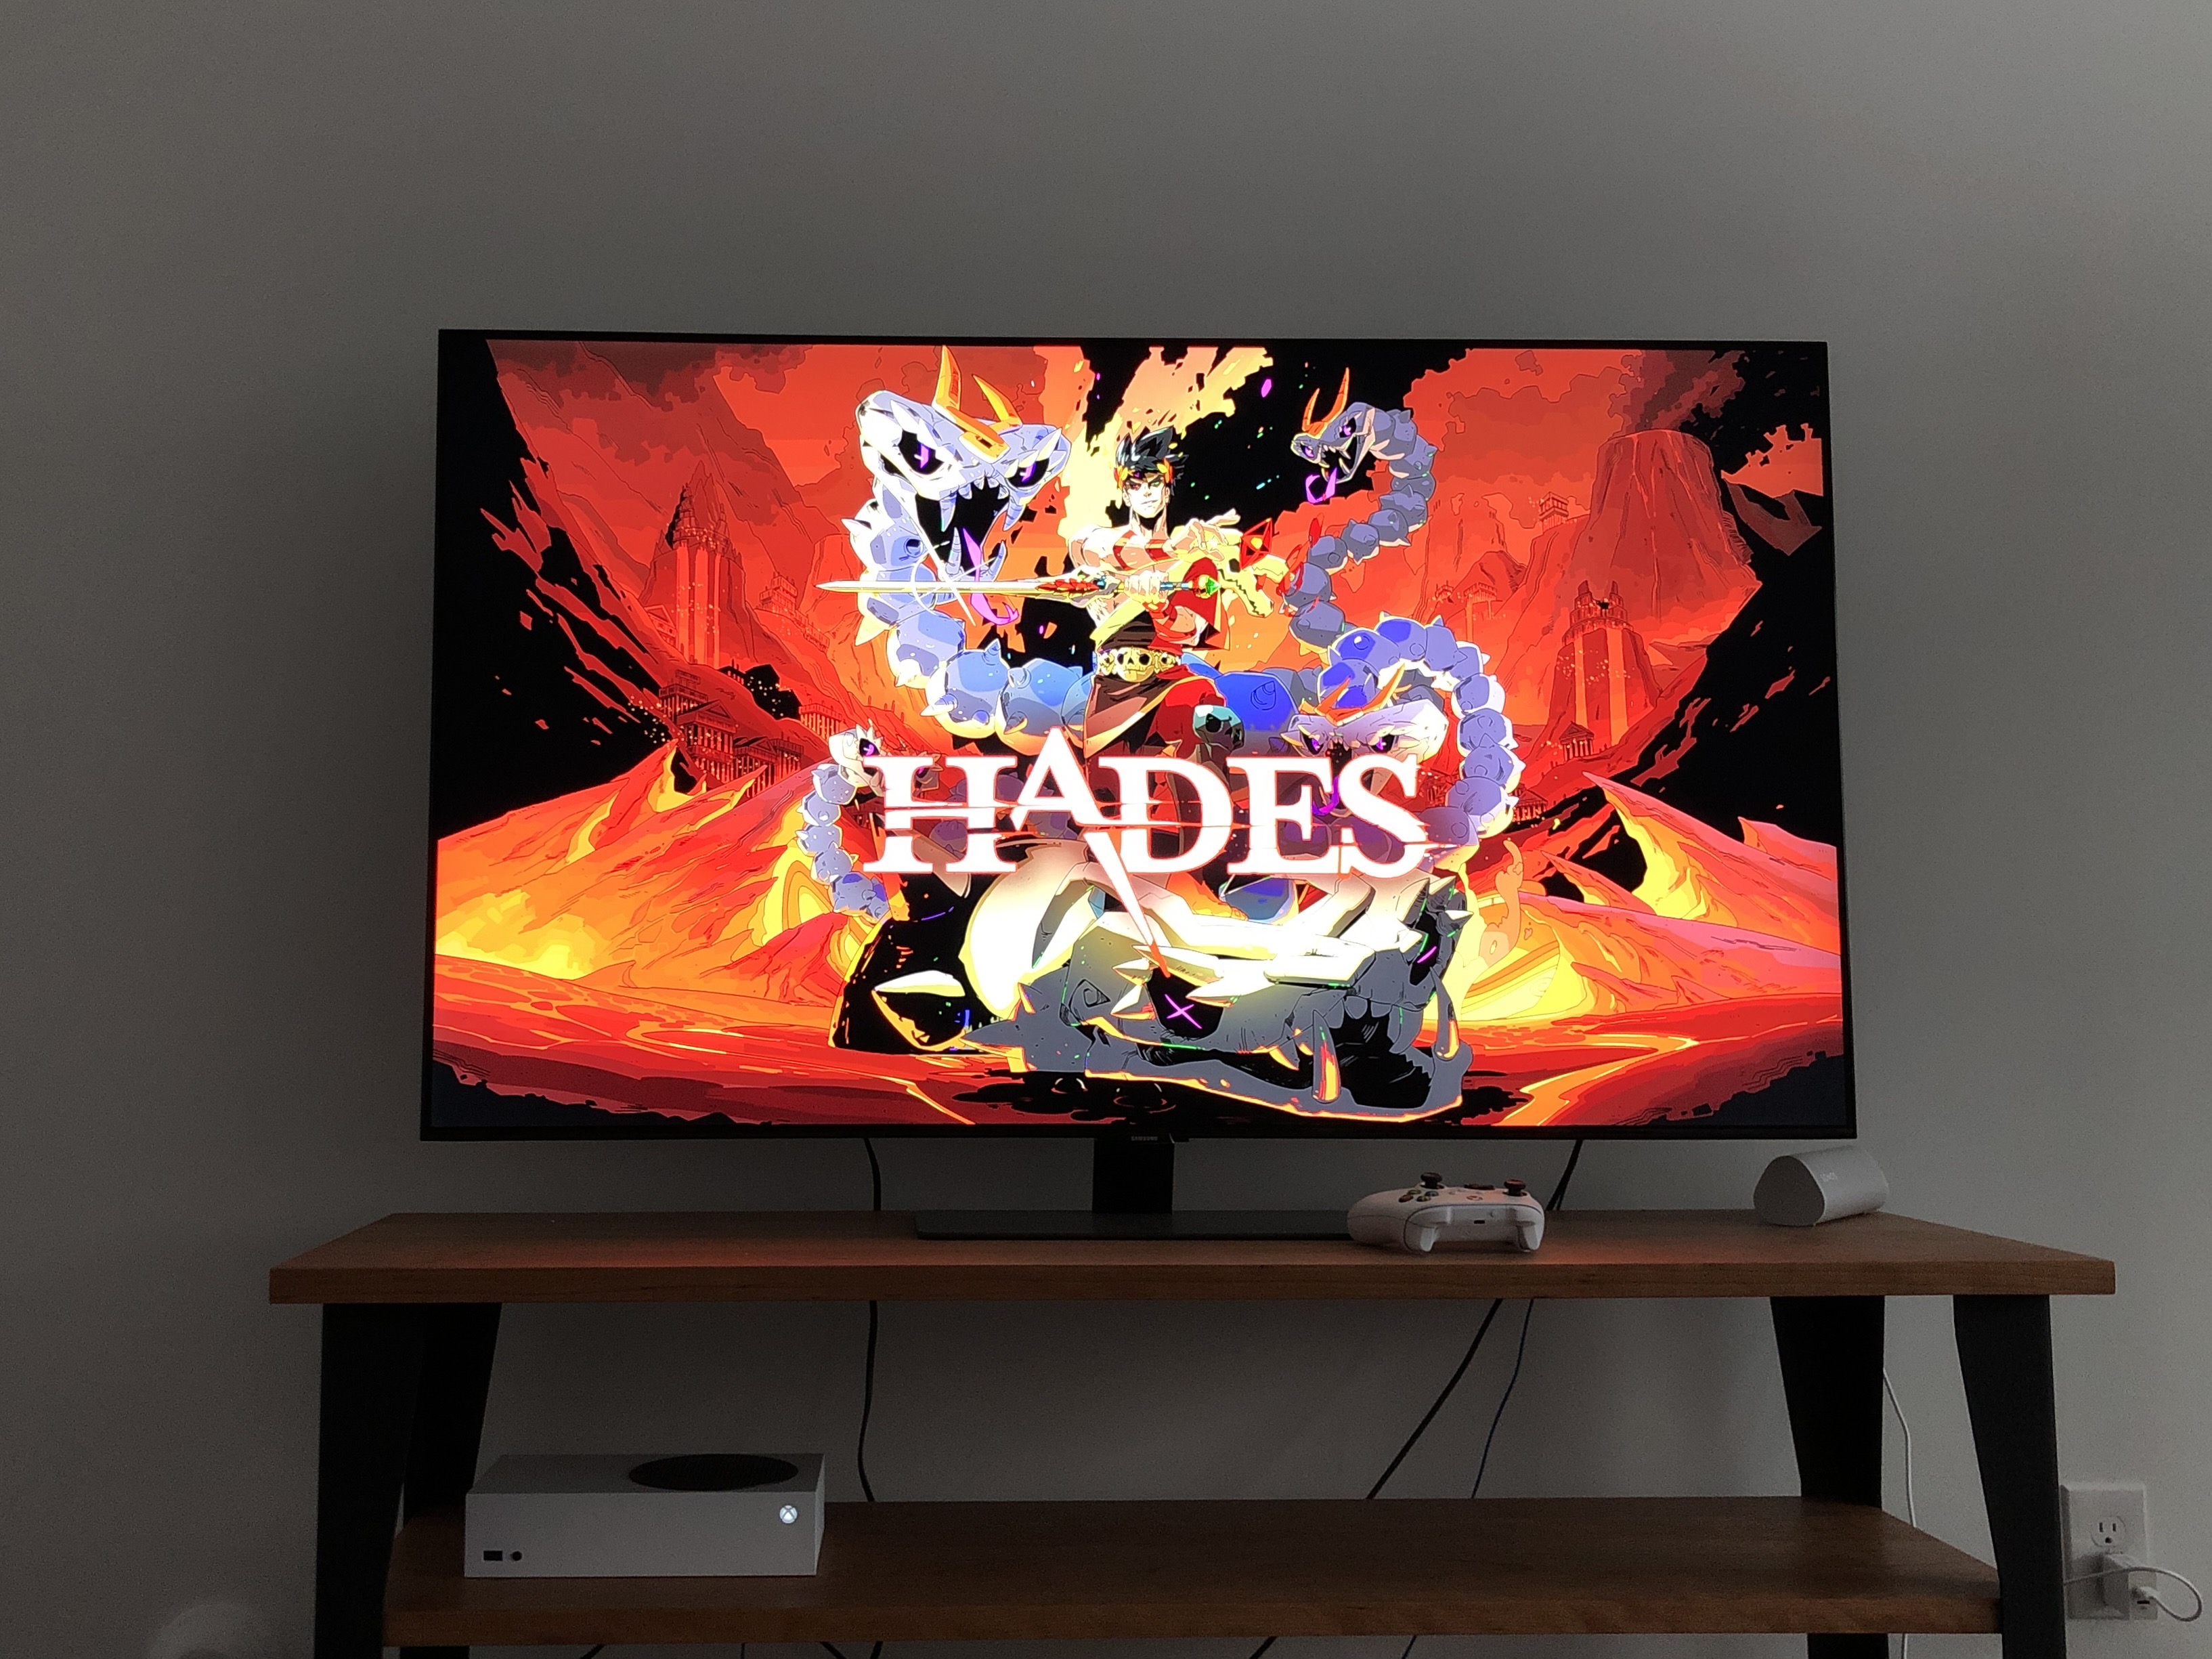 A TV showing the title screen for Hades, with an Xbox Series S and white controller in the frame, also 